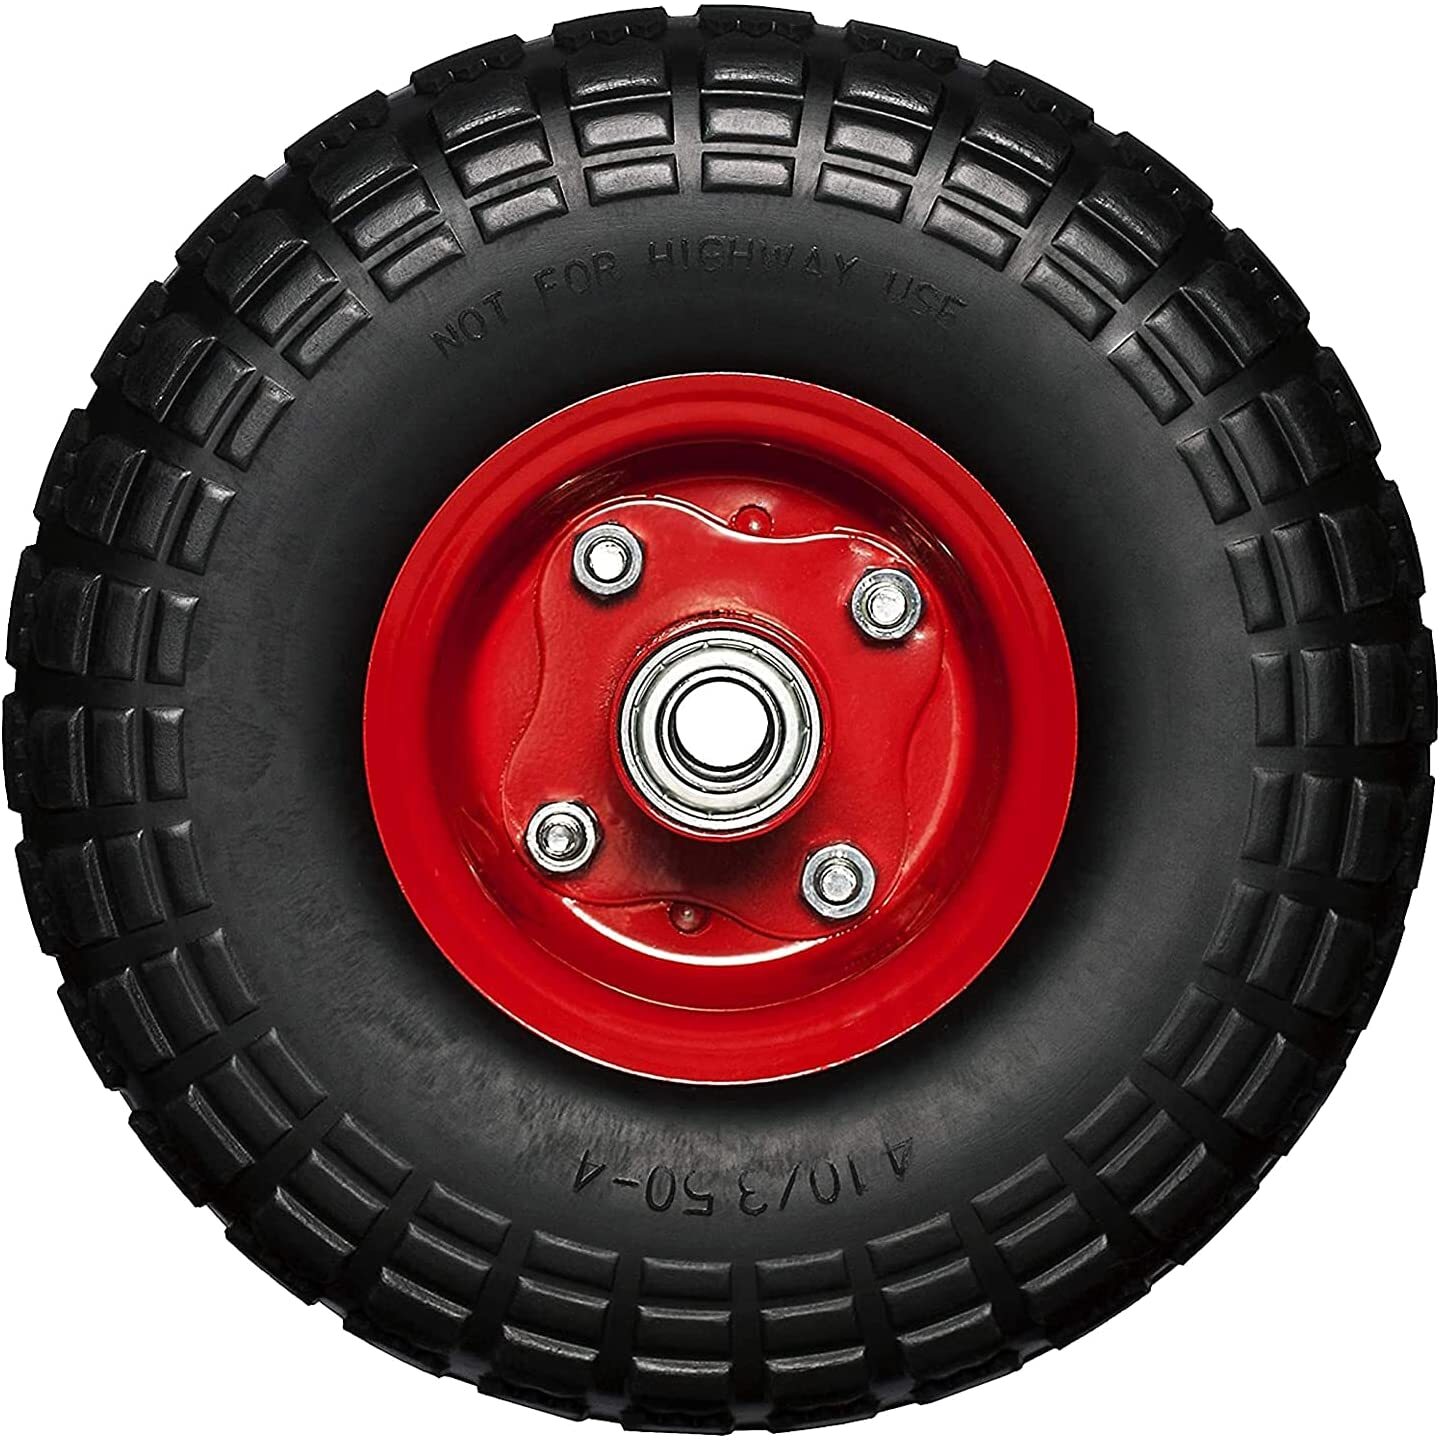 All Purpose Utility Tire Universal Fit Low Profile Flat Free 10” Hand Truck Tires On Wheel UI PRO TOOLS 2 Piece 